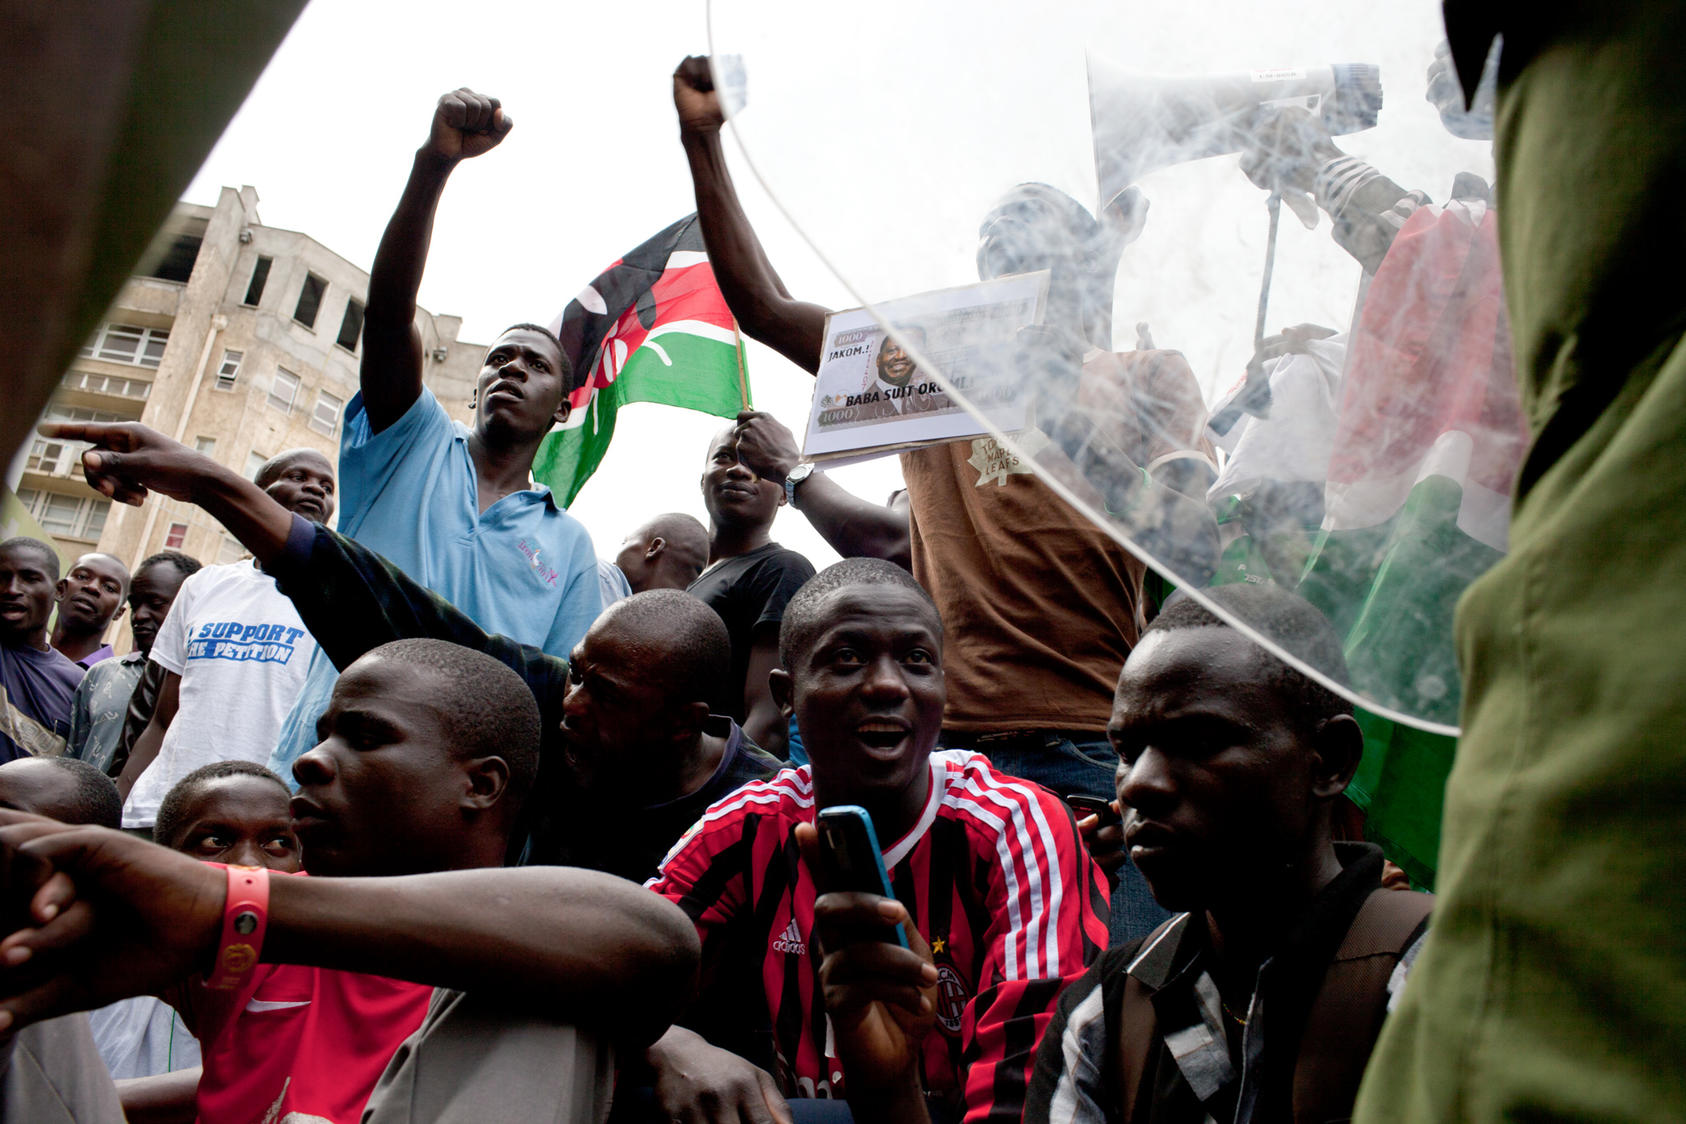 Supporters of Raila Odinga, Kenya's prime minister and presidential candidate, stage a protest outside the Supreme Court in Nairobi, March 30, 2013. The court on Saturday unanimously upheld the election victory of Uhuru Kenyatta as the country's president, dismissing allegations that the election had been rigged. 